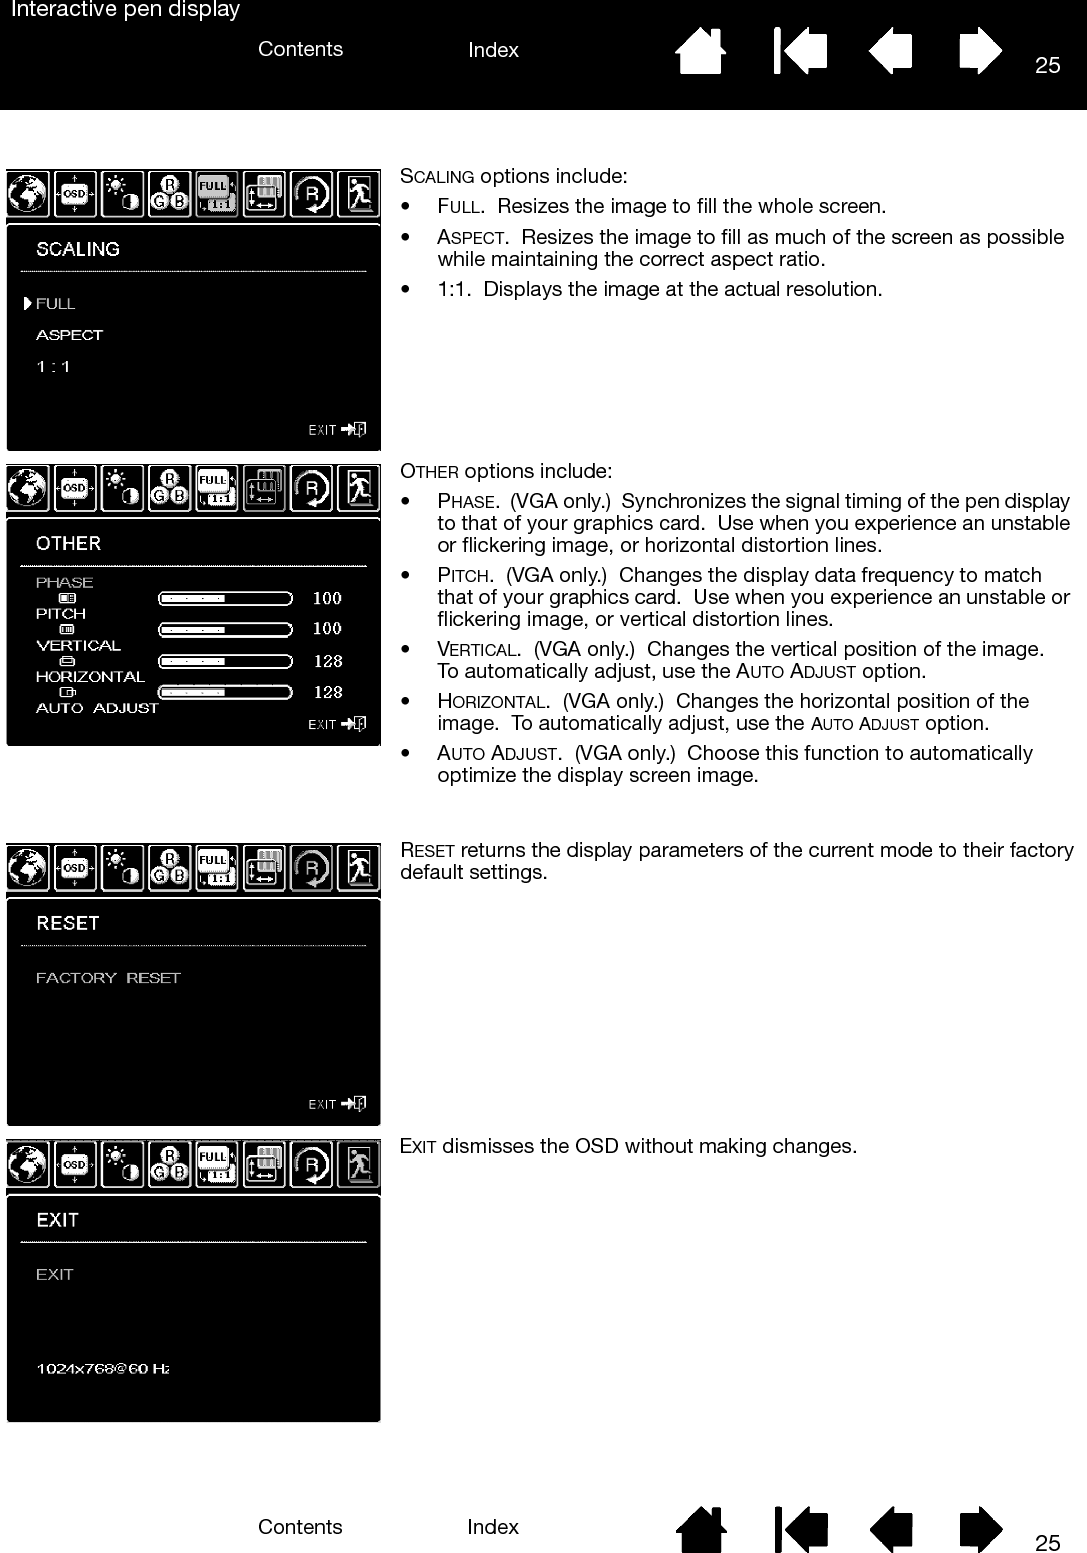 25IndexContents25IndexContentsInteractive pen displaySCALING options include:•FULL.  Resizes the image to fill the whole screen.•ASPECT.  Resizes the image to fill as much of the screen as possible while maintaining the correct aspect ratio.• 1:1.  Displays the image at the actual resolution.OTHER options include:•PHASE.  (VGA only.)  Synchronizes the signal timing of the pen display to that of your graphics card.  Use when you experience an unstable or flickering image, or horizontal distortion lines.•PITCH.  (VGA only.)  Changes the display data frequency to match that of your graphics card.  Use when you experience an unstable or flickering image, or vertical distortion lines.•VERTICAL.  (VGA only.)  Changes the vertical position of the image.  To automatically adjust, use the AUTO ADJUST option.•HORIZONTAL.  (VGA only.)  Changes the horizontal position of the image.  To automatically adjust, use the AUTO ADJUST option.•AUTO ADJUST.  (VGA only.)  Choose this function to automatically optimize the display screen image.RESET returns the display parameters of the current mode to their factory default settings.EXIT dismisses the OSD without making changes.